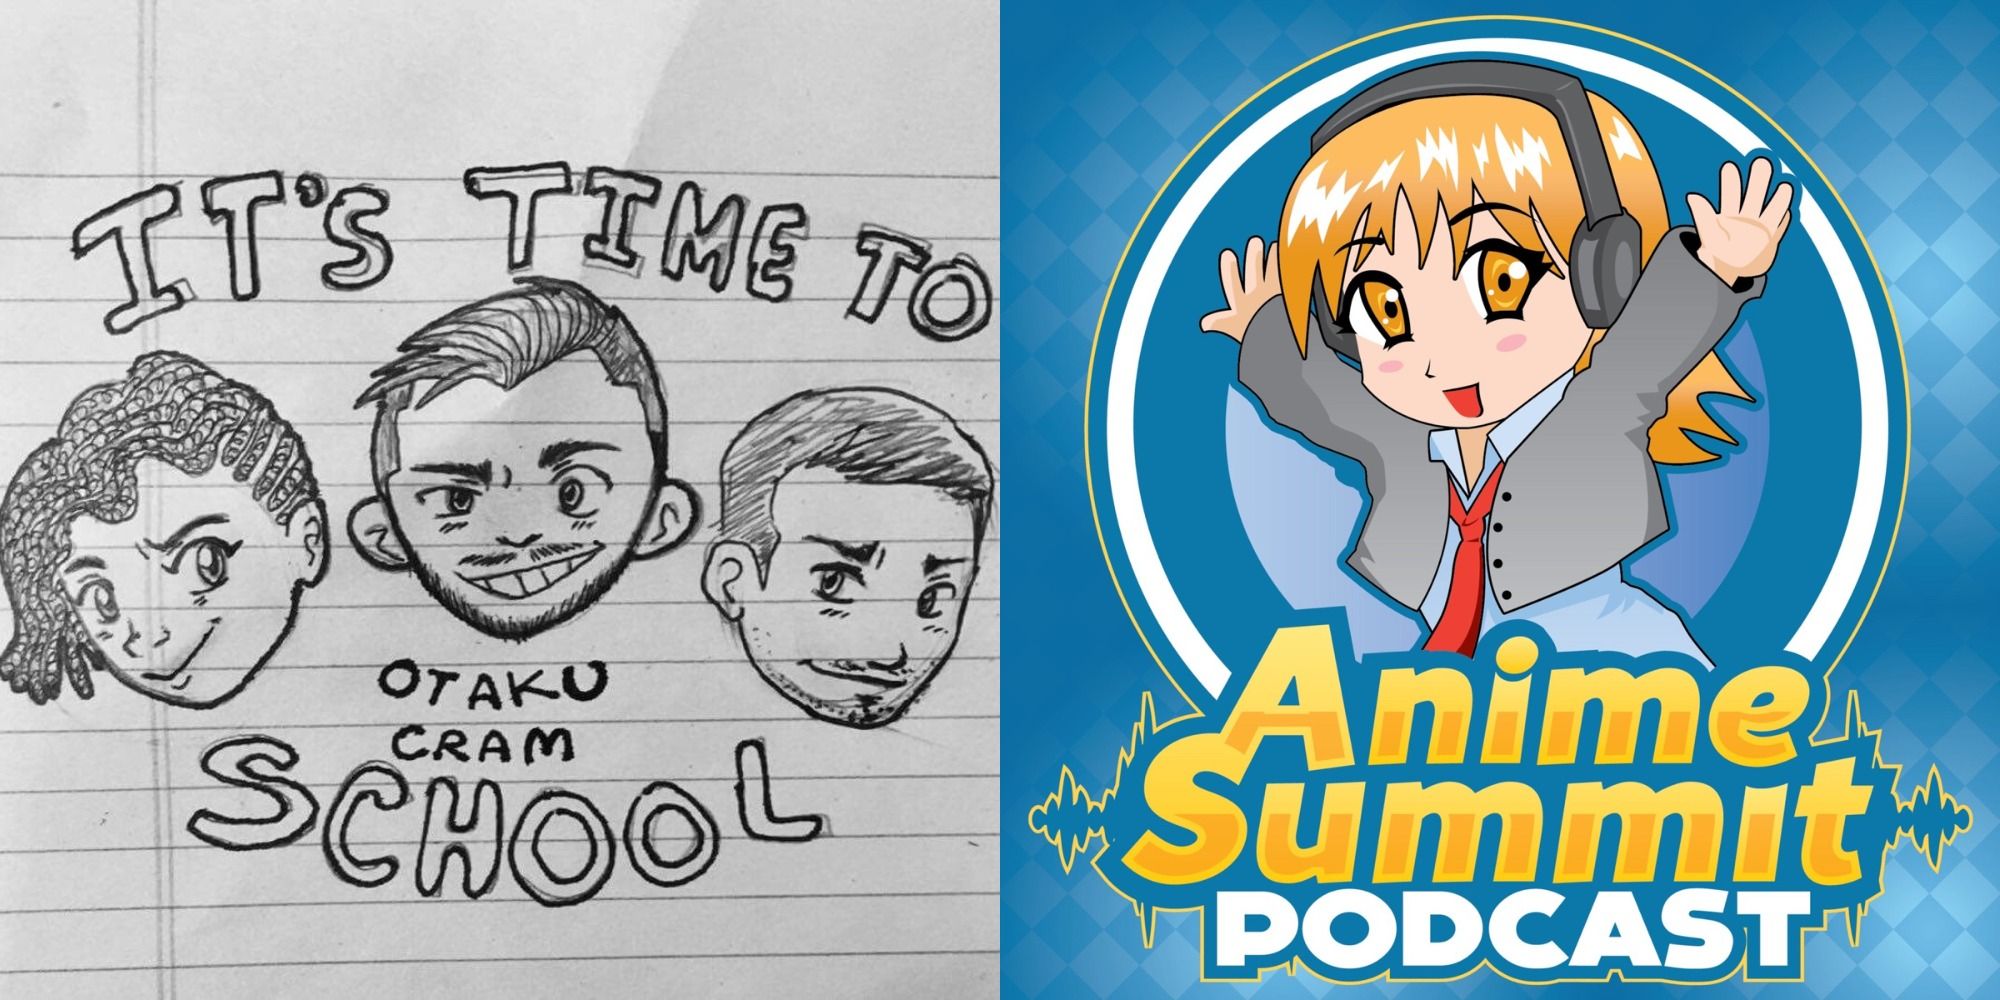 The 10 Best Podcasts For Anime Fans, According To Ranker - Oxtero